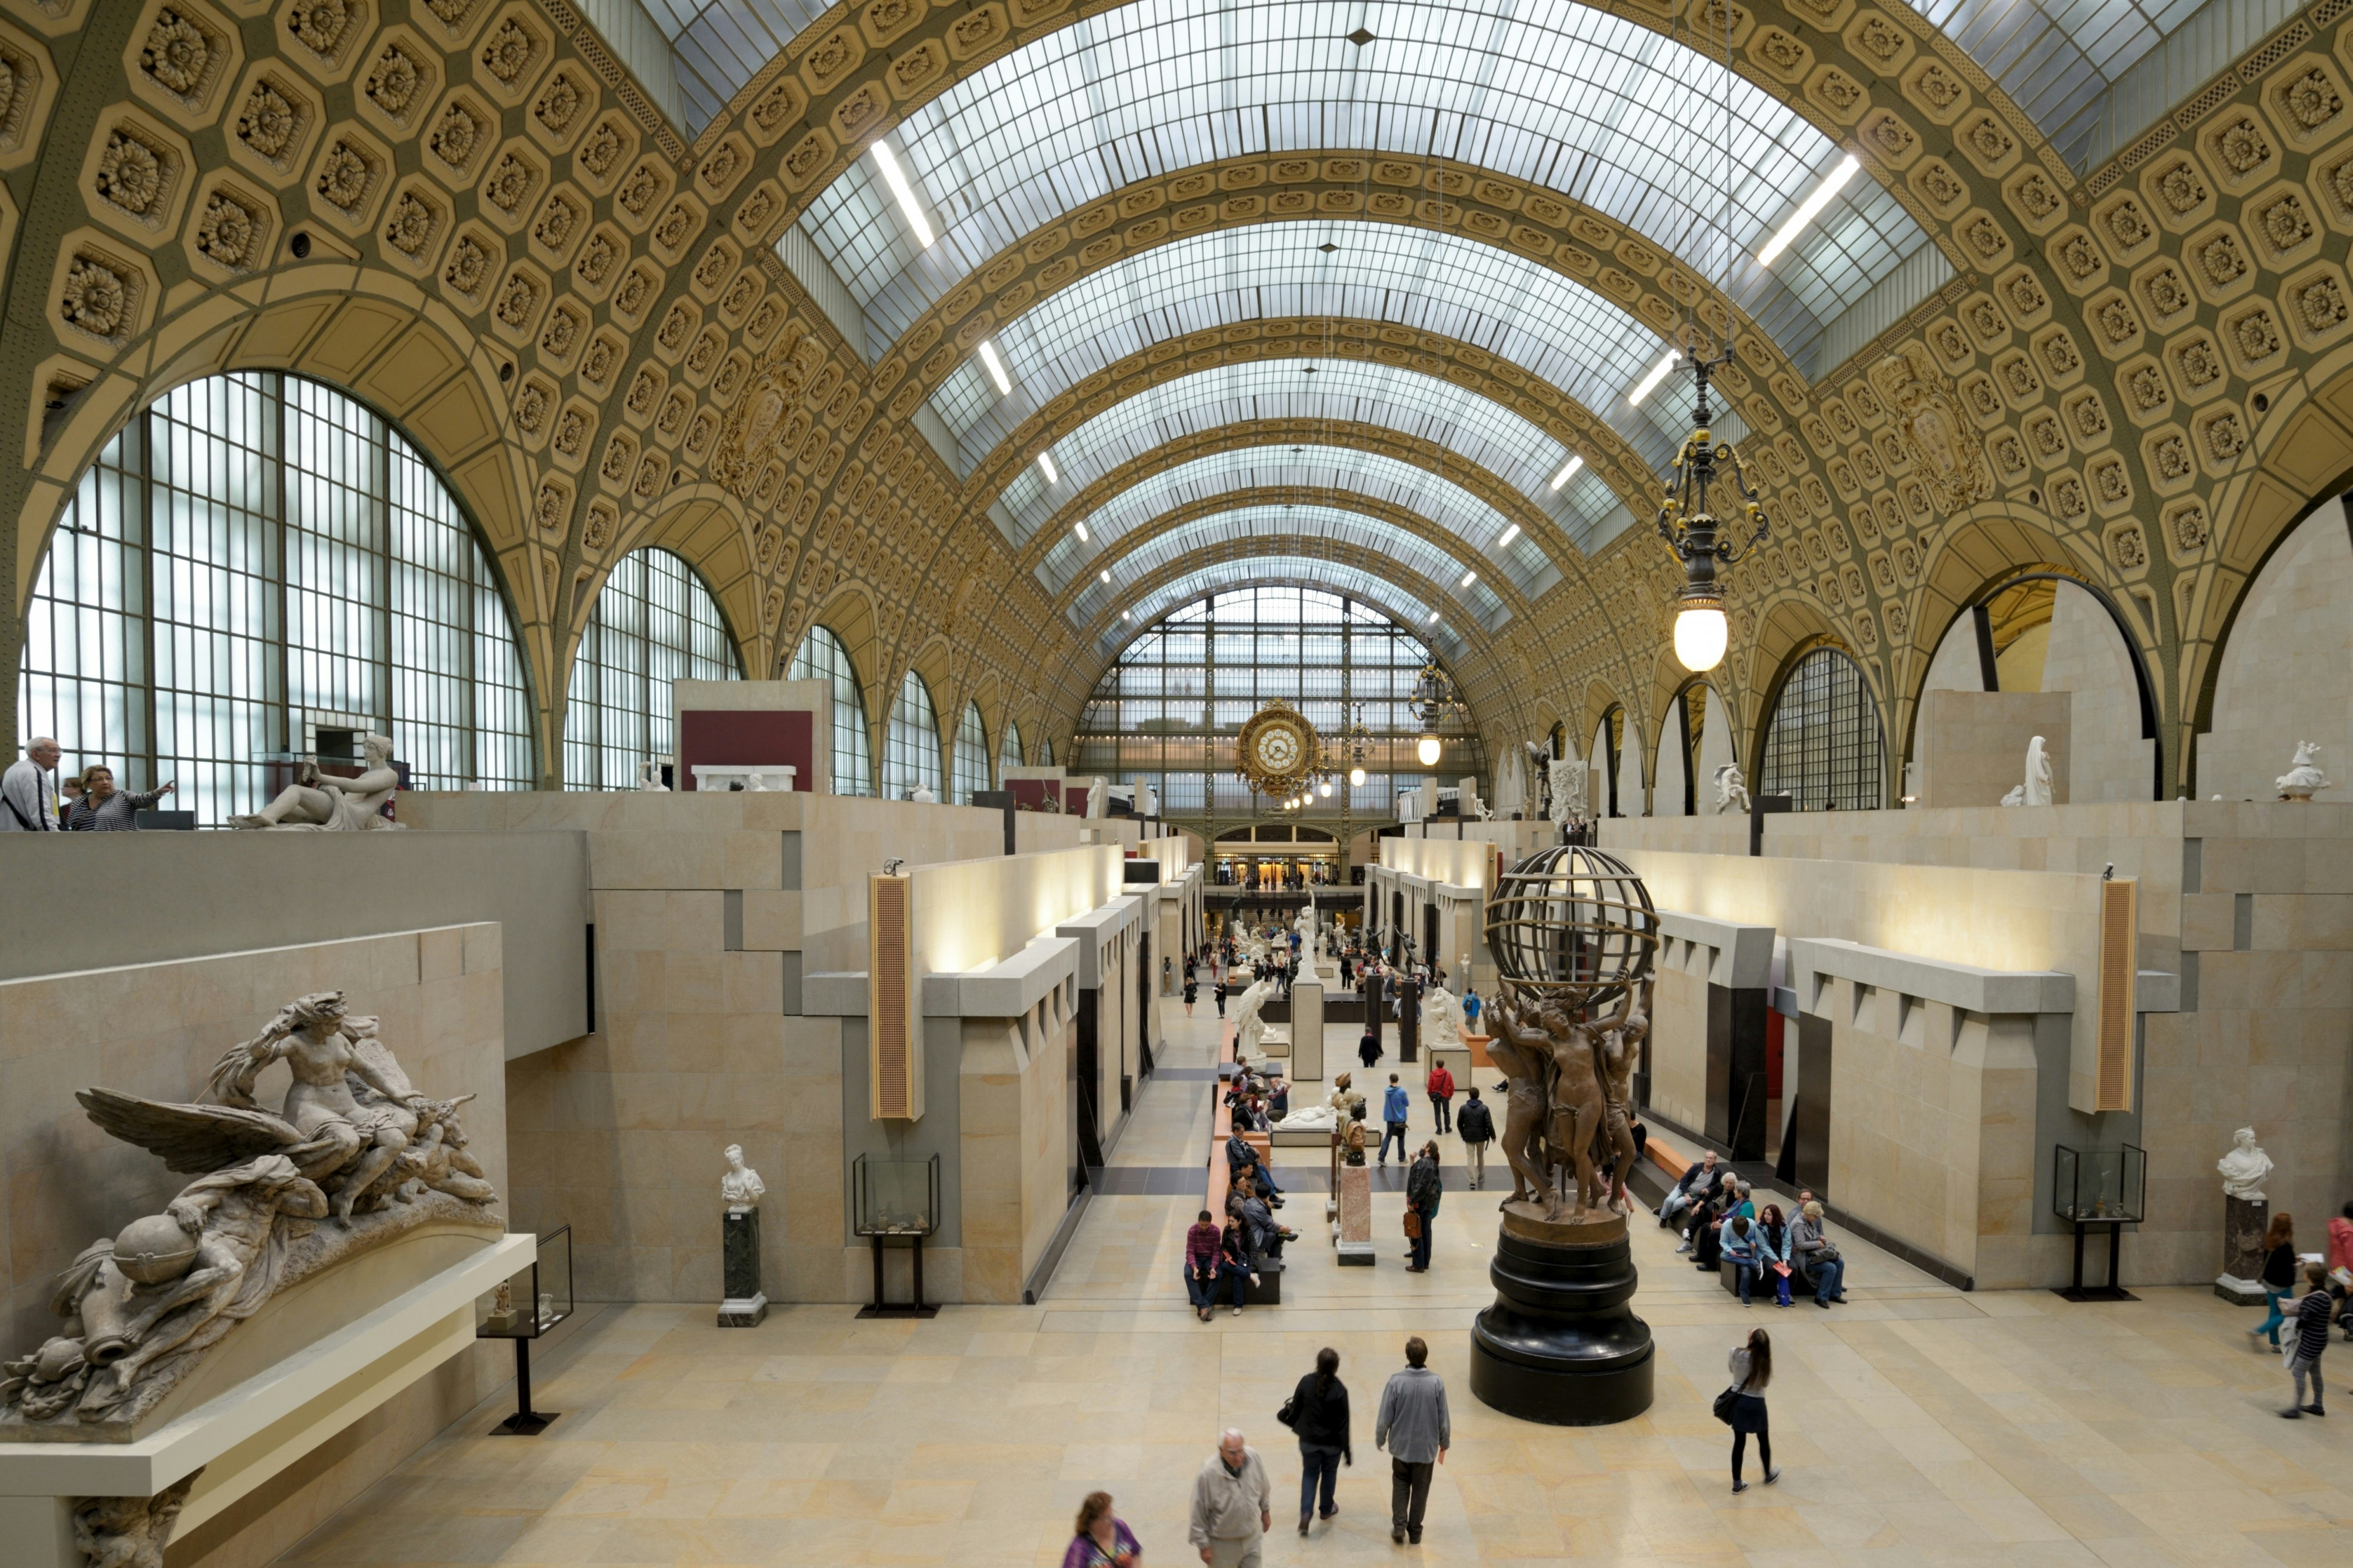 The grand, spacious interior of the Musée d’Orsay in Paris with many people strolling around the exhibits that include large statues and paintings